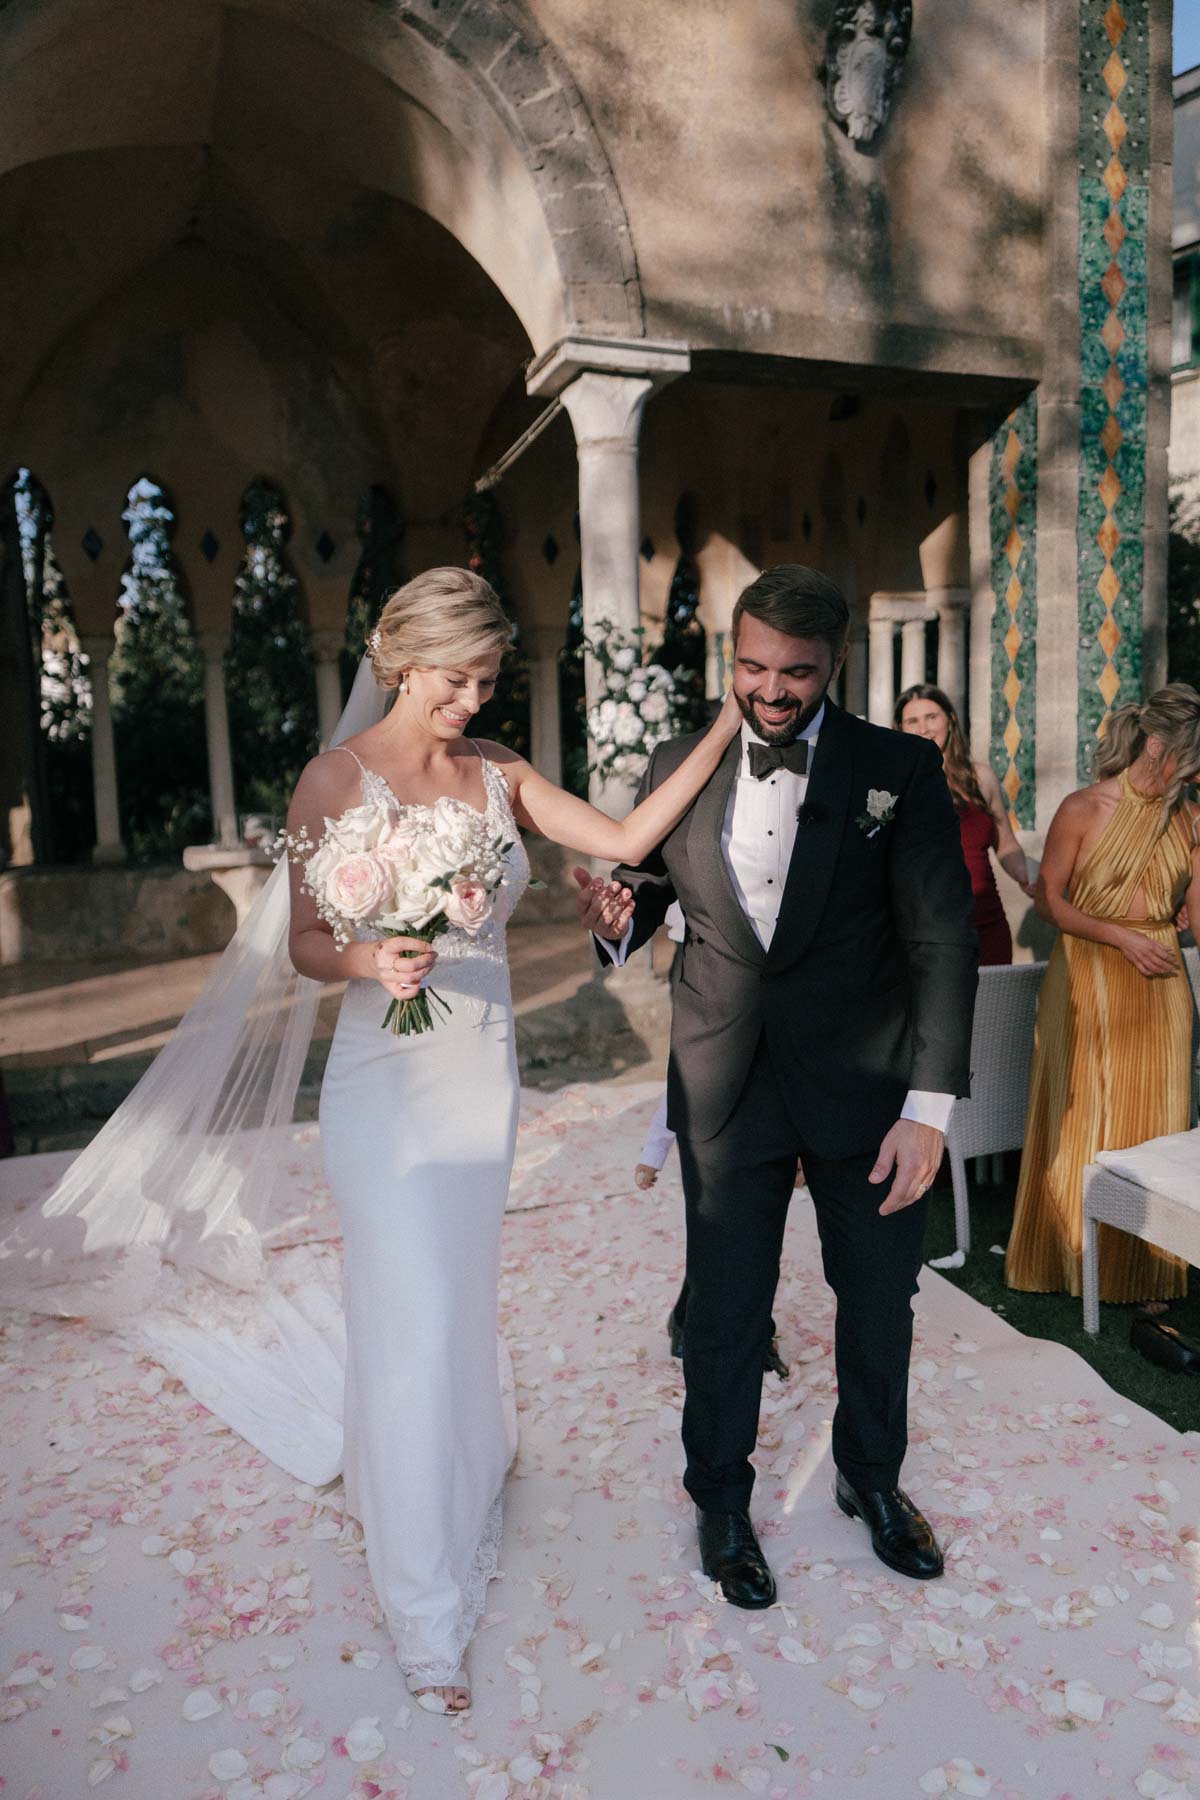 Melanie and Ruben walking down a rose petal-strewn aisle, smiling joyfully at their Villa Cimbrone wedding, with historic arches and columns in the background.